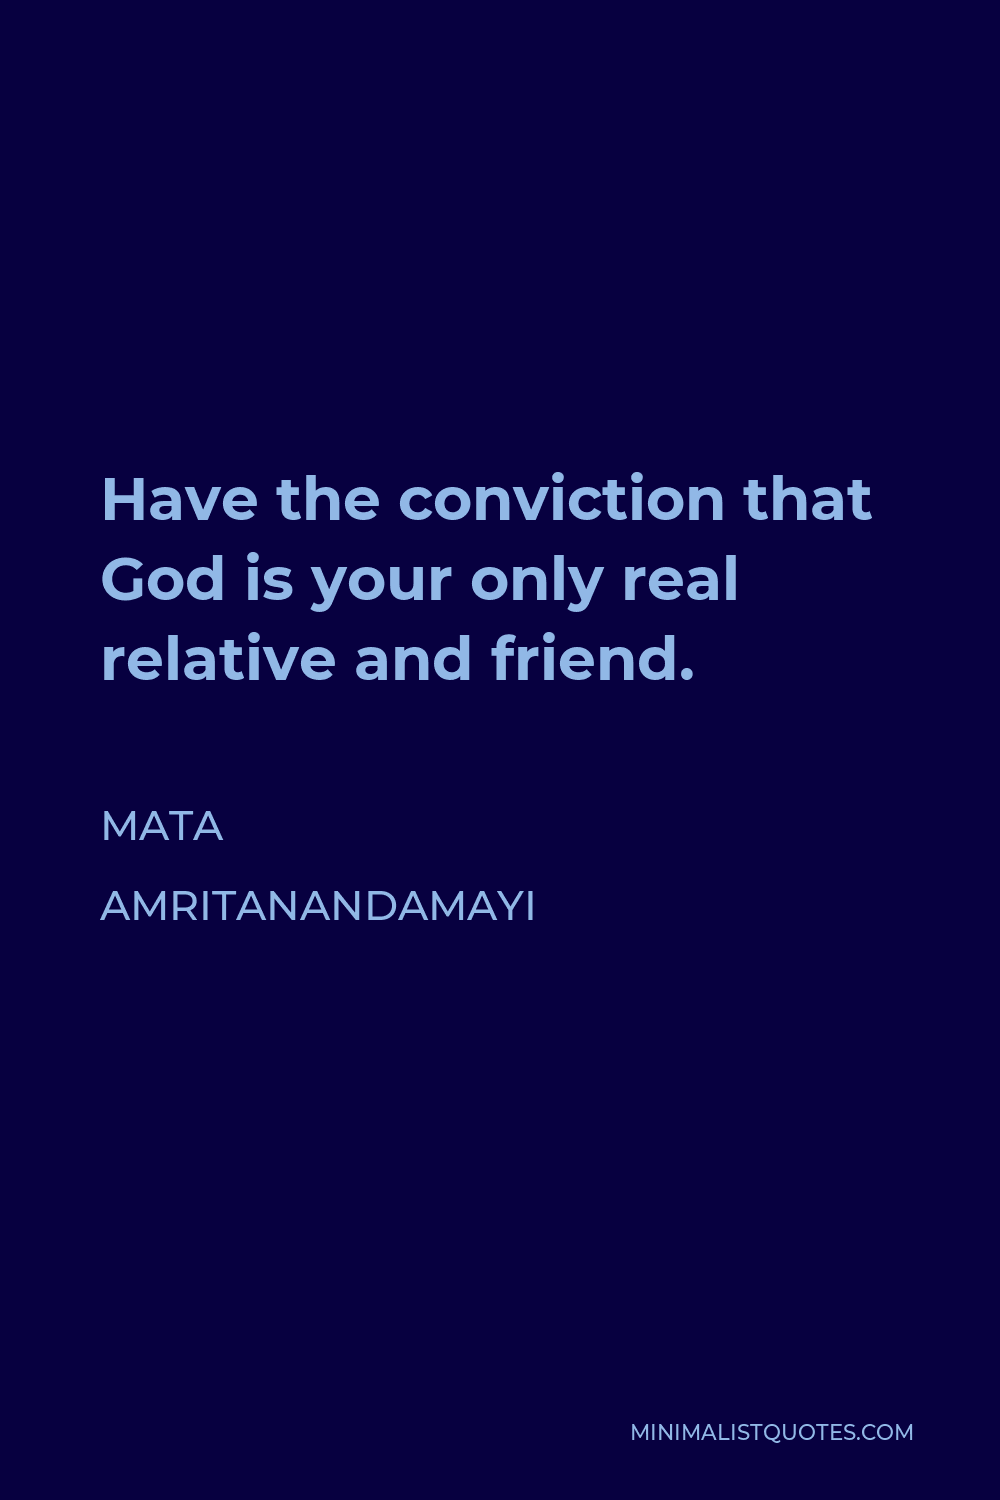 Mata Amritanandamayi Quote - Have the conviction that God is your only real relative and friend.